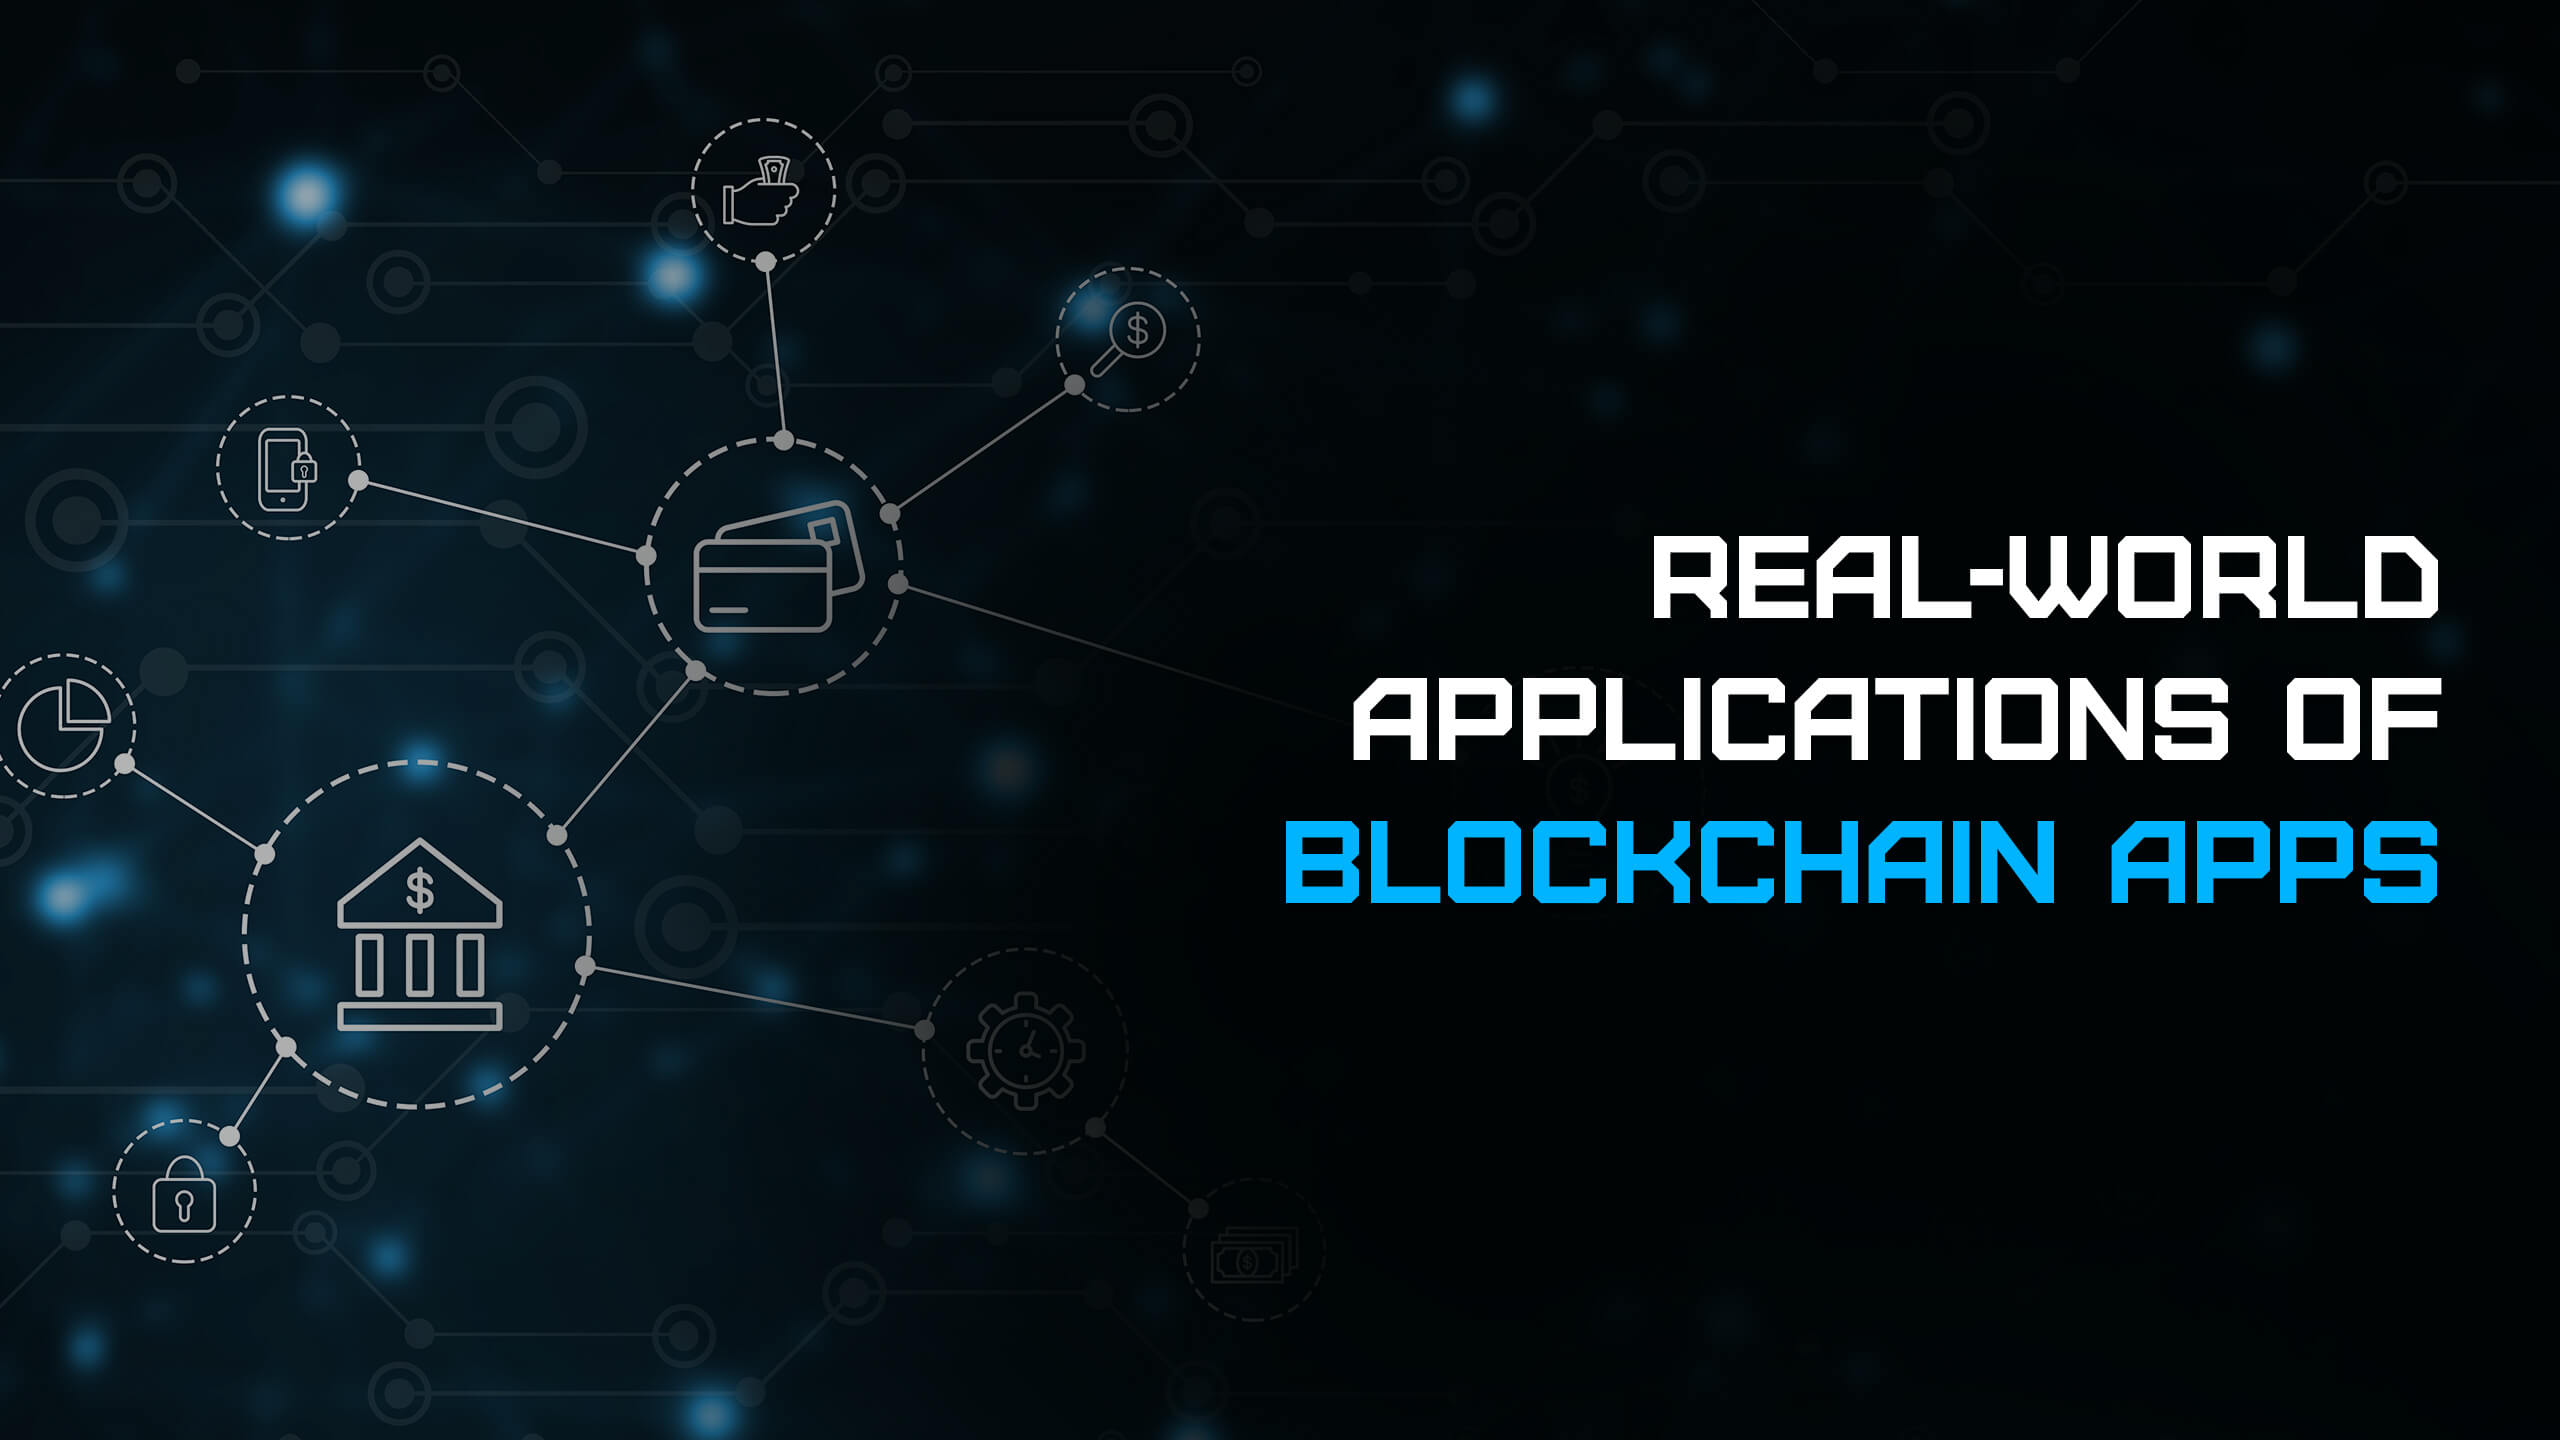 Real-World Applications of Blockchain Apps